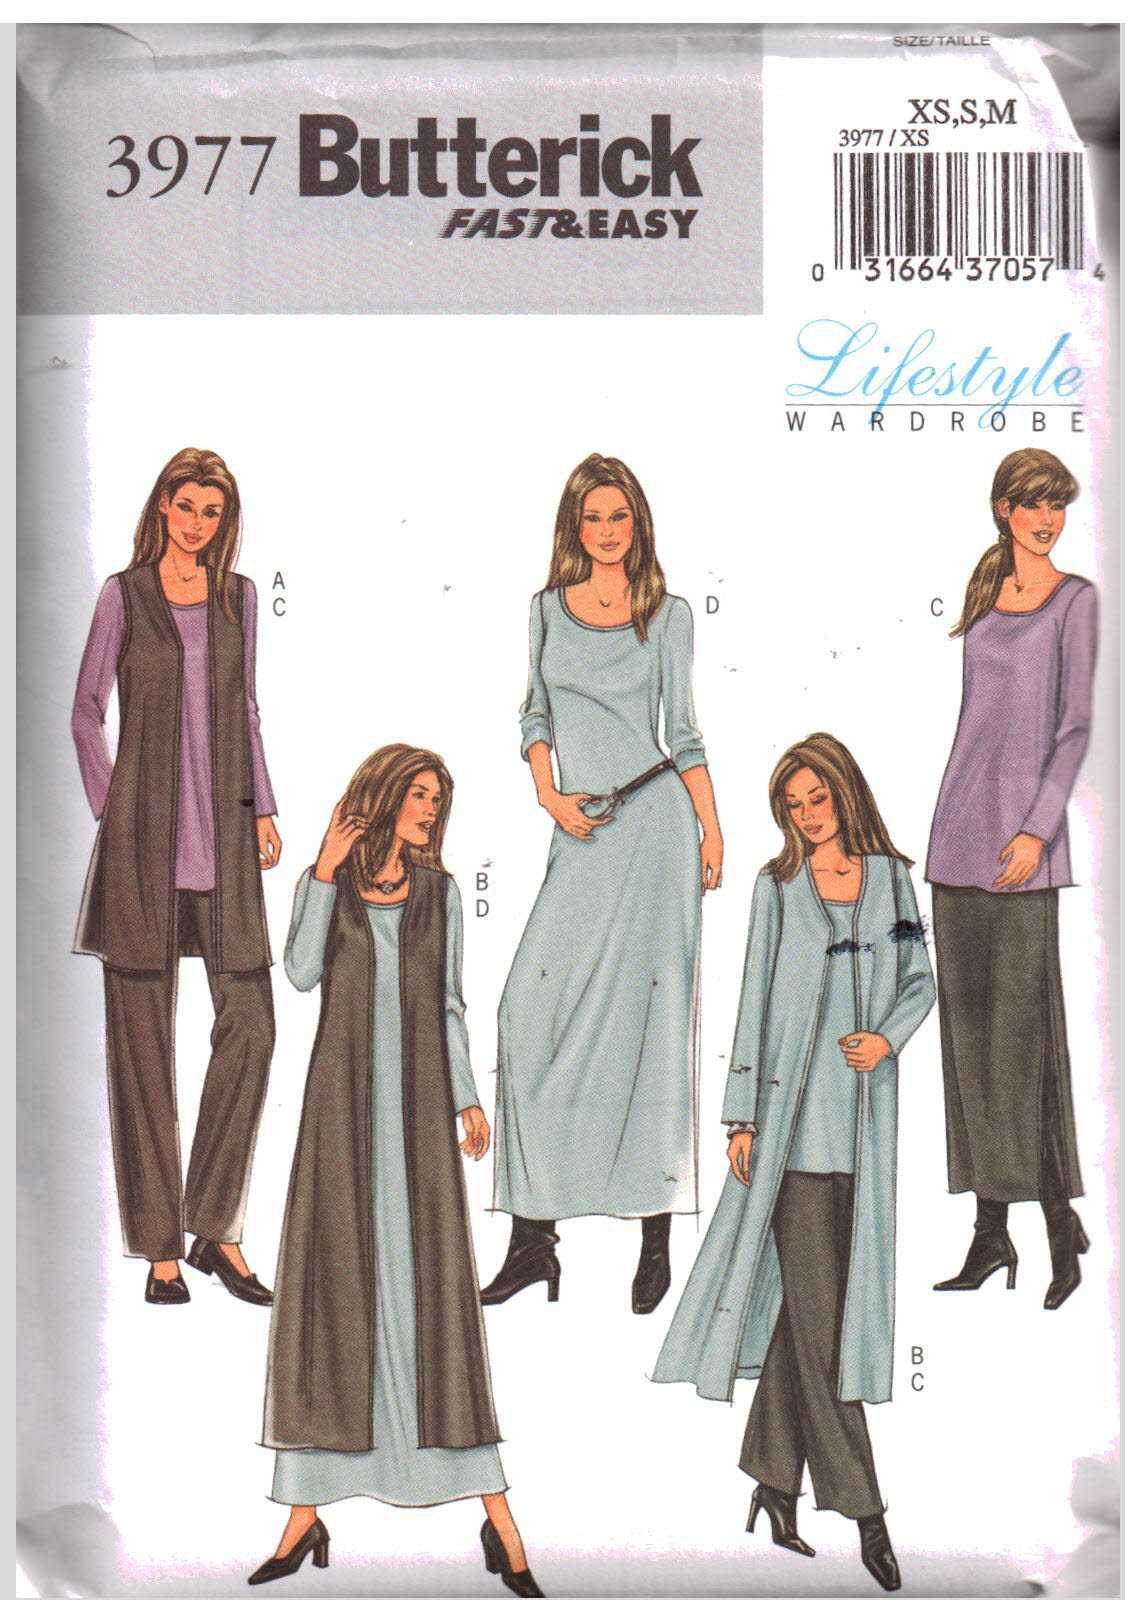 Tank top Uncut Misses sewing pattern Button front Shirt w/ hood Ankle length skirt McCalls 2202 size 12 14 16 Long pants or Capris